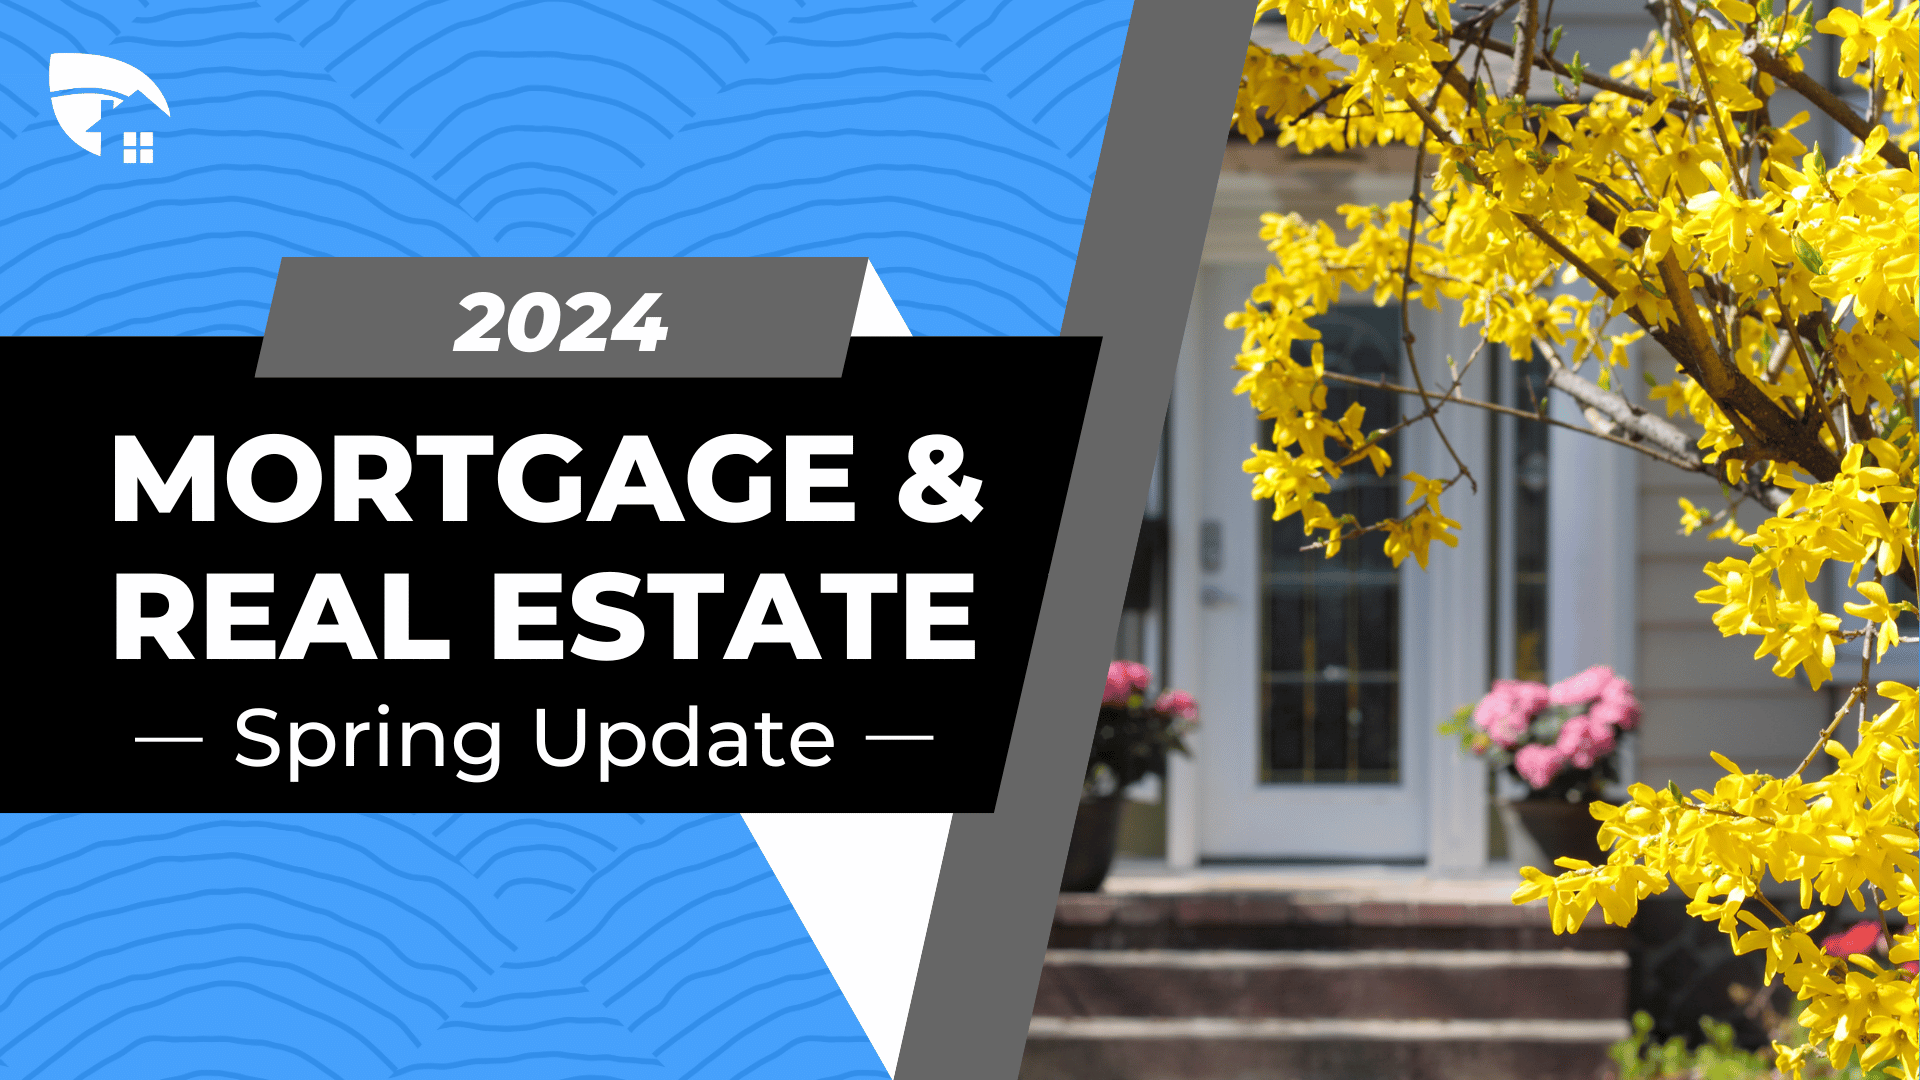 Homeseed’s 2024 Mortgage & Real Estate Spring Update